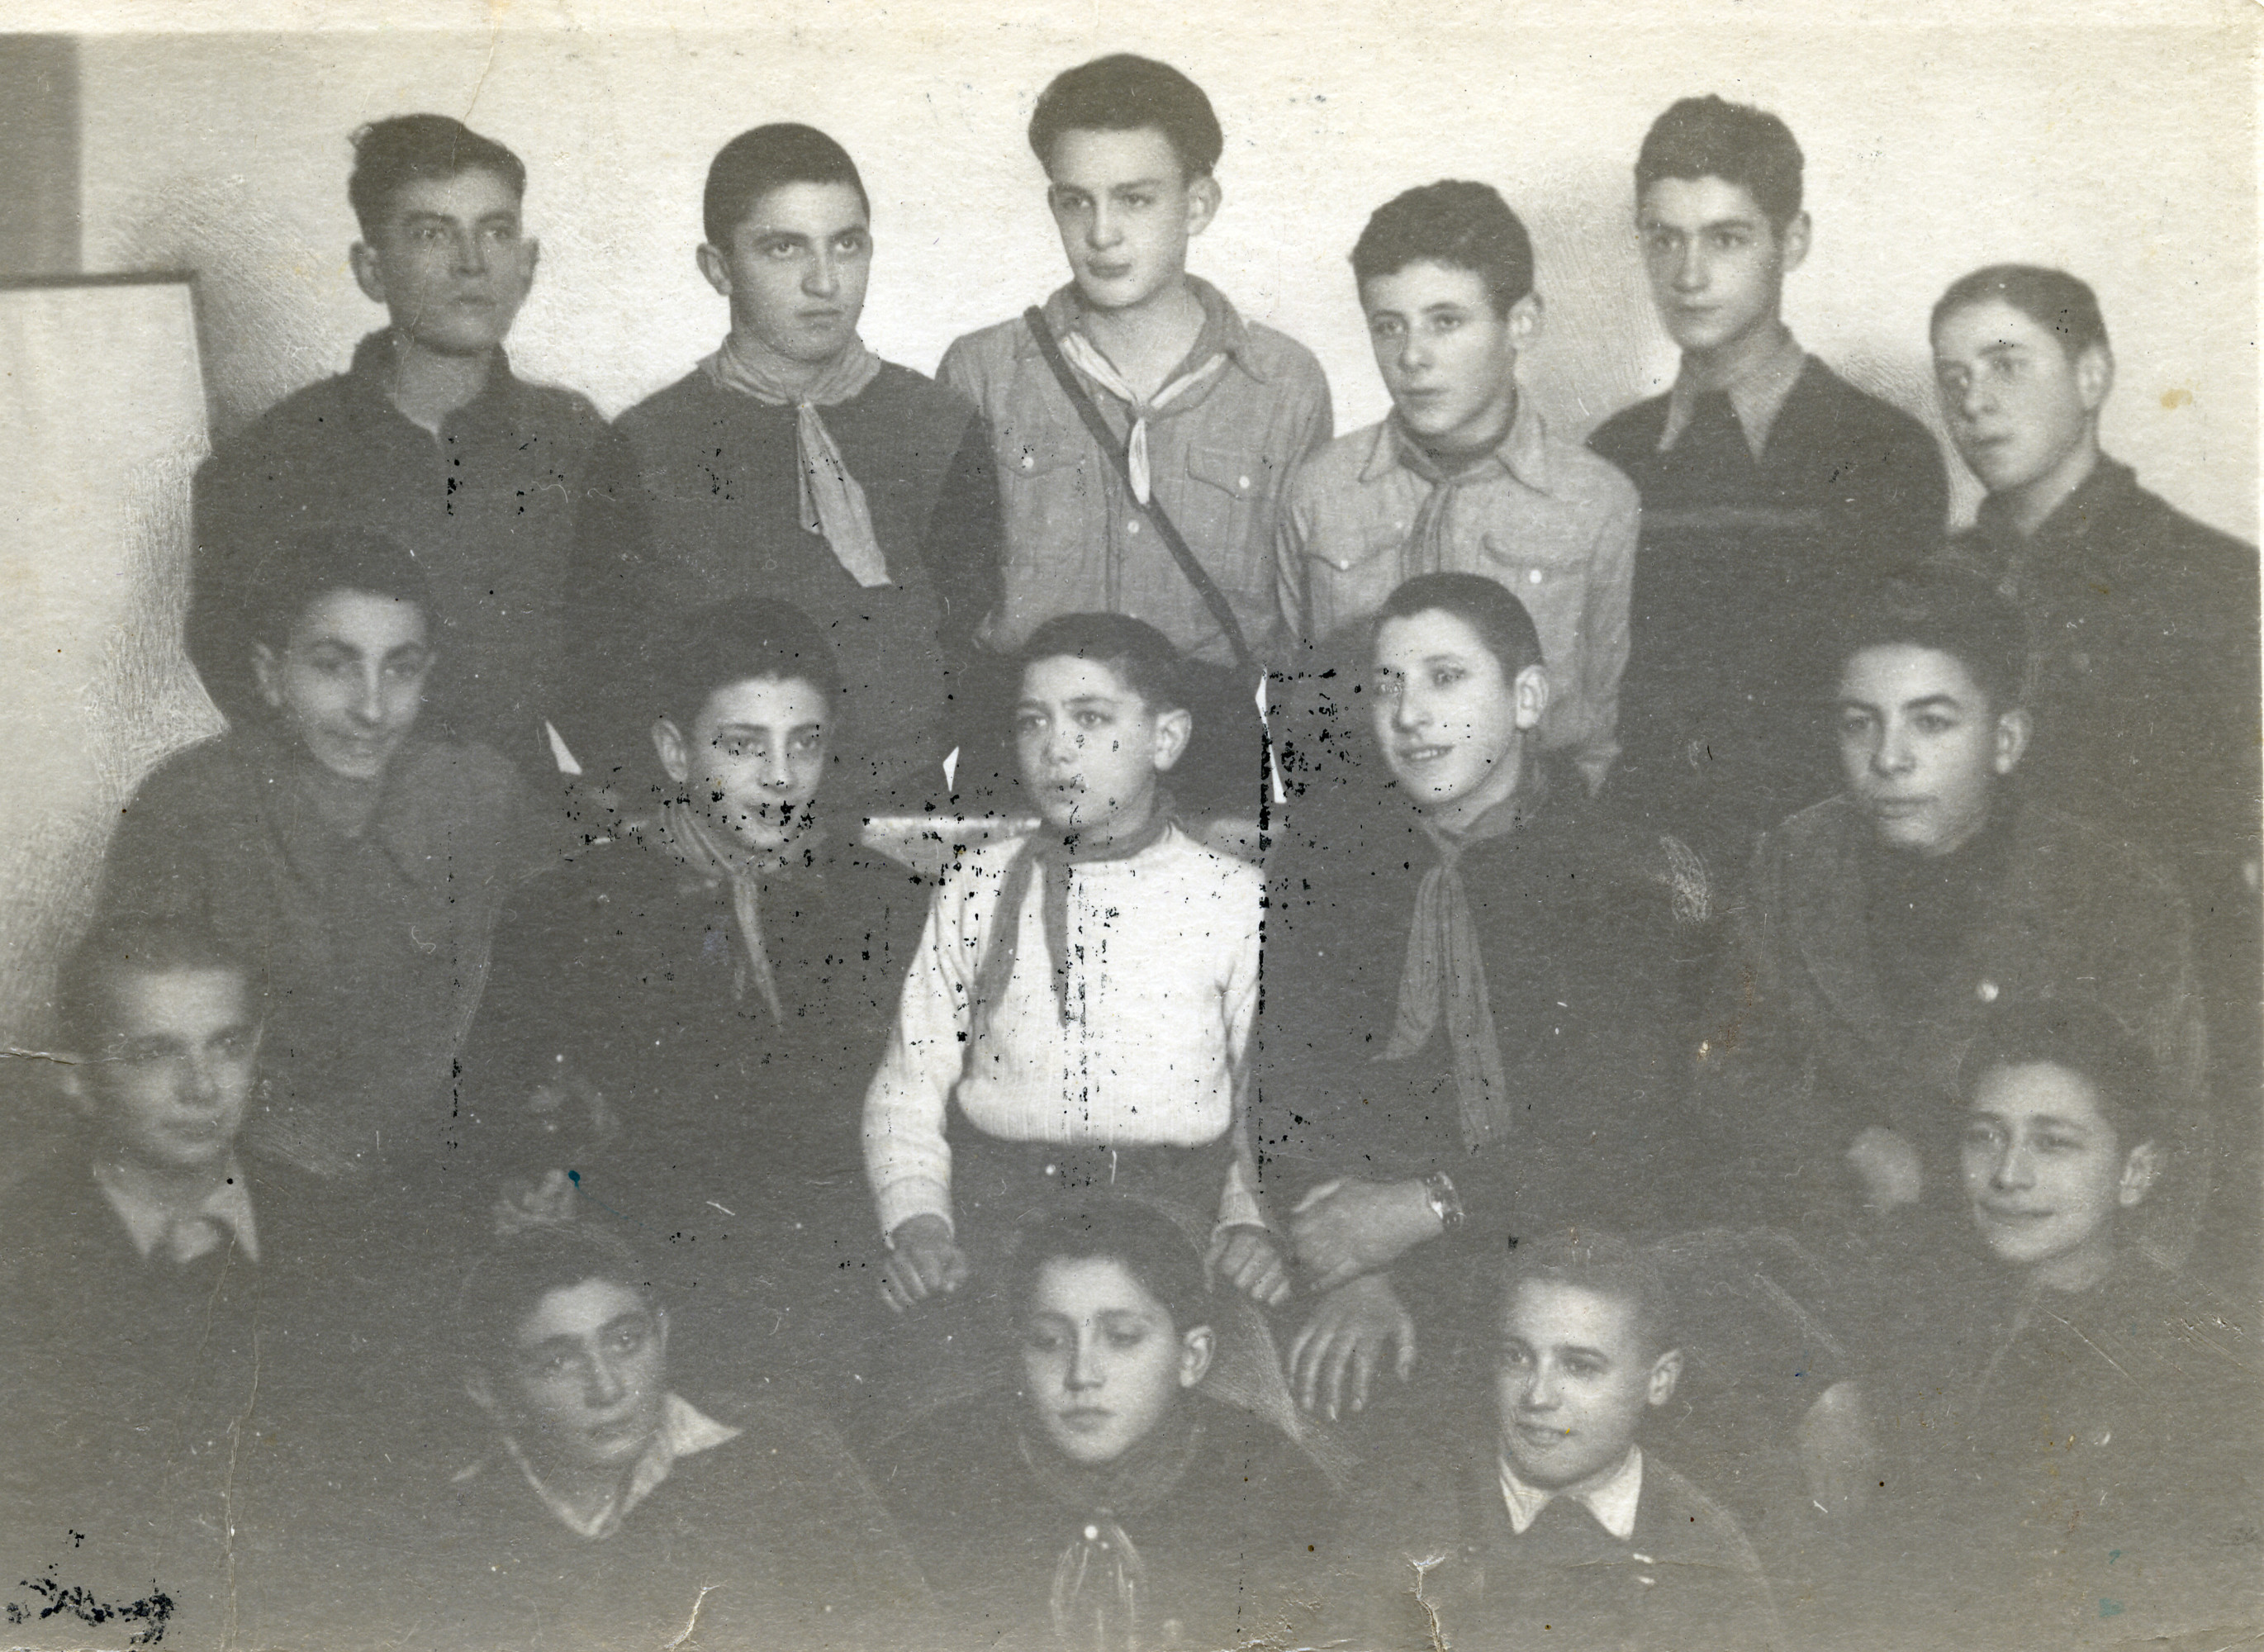 Group portrait of members of the Shomer Hazair youth movement in Sofia.

Among those pictured are Avraham Alajem (middle row, far right) and a youth group counsellor, Dan Pelli (back row, third from the left).